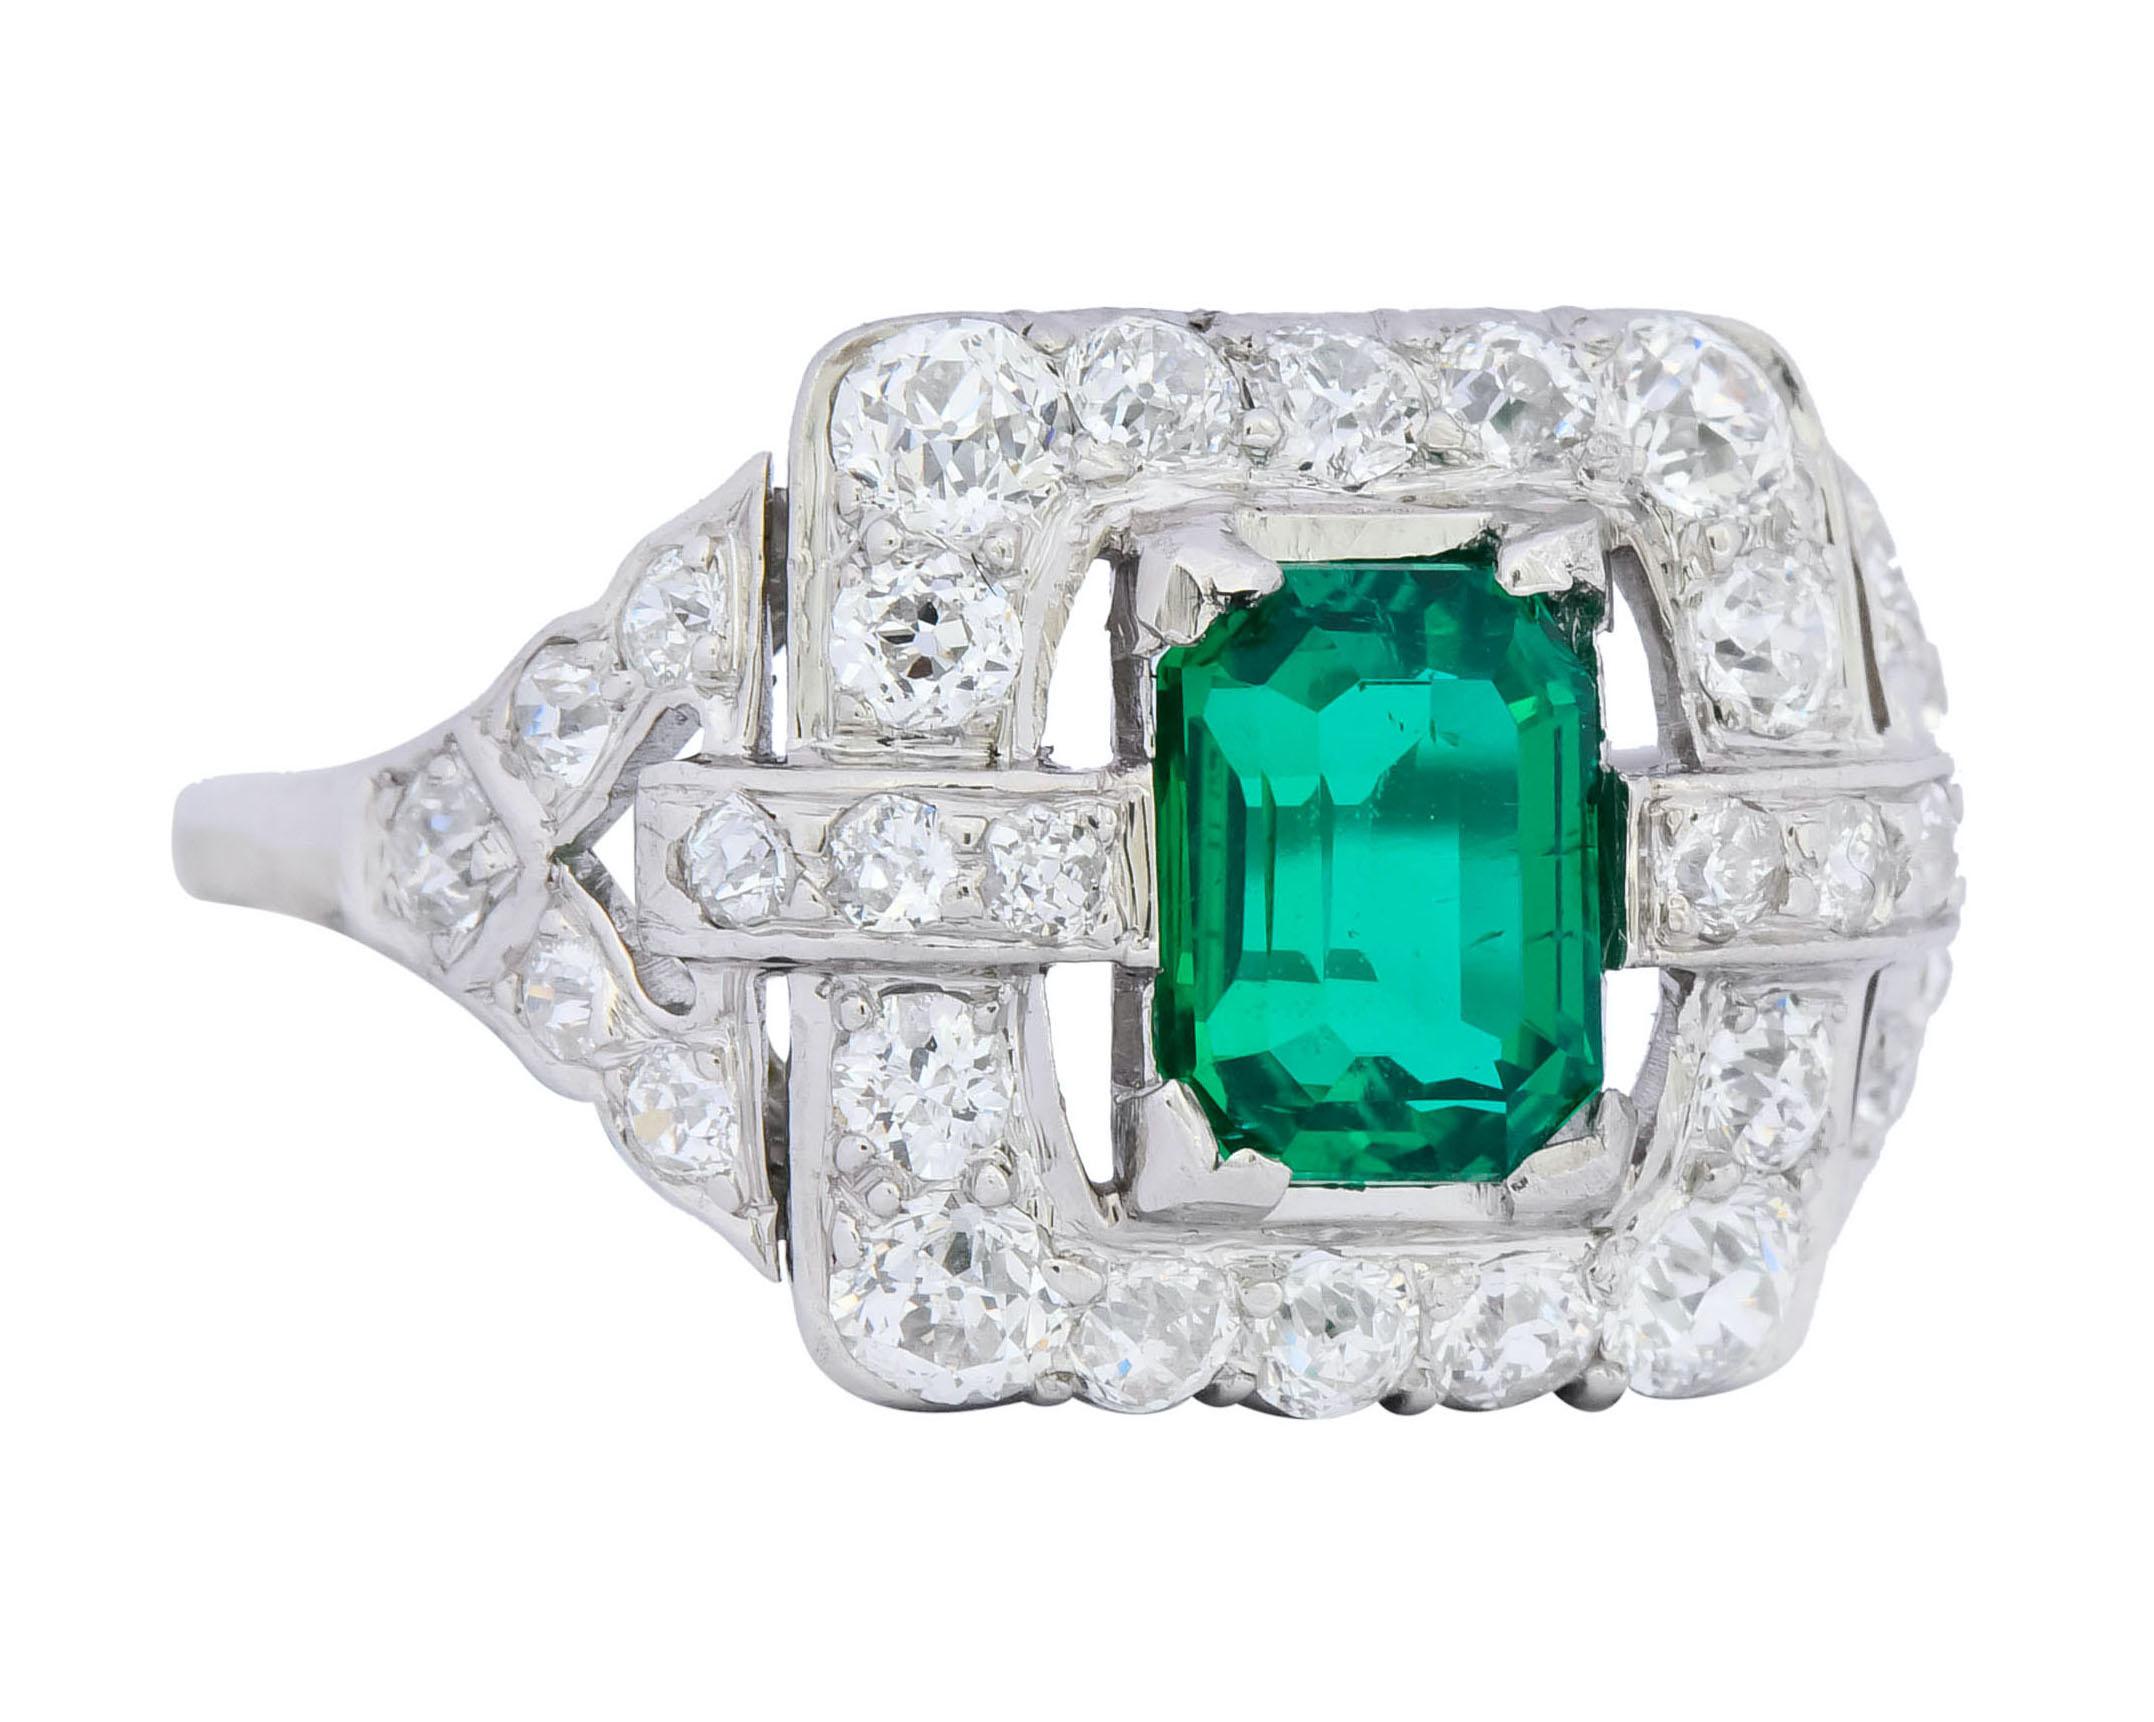 Centering an emerald cut Colombian emerald weighing 1.11 carats, transparent and a very saturated green color with minor clarity enhancements

With a halo surround and a split shank set throughout with old European cut diamonds weighing